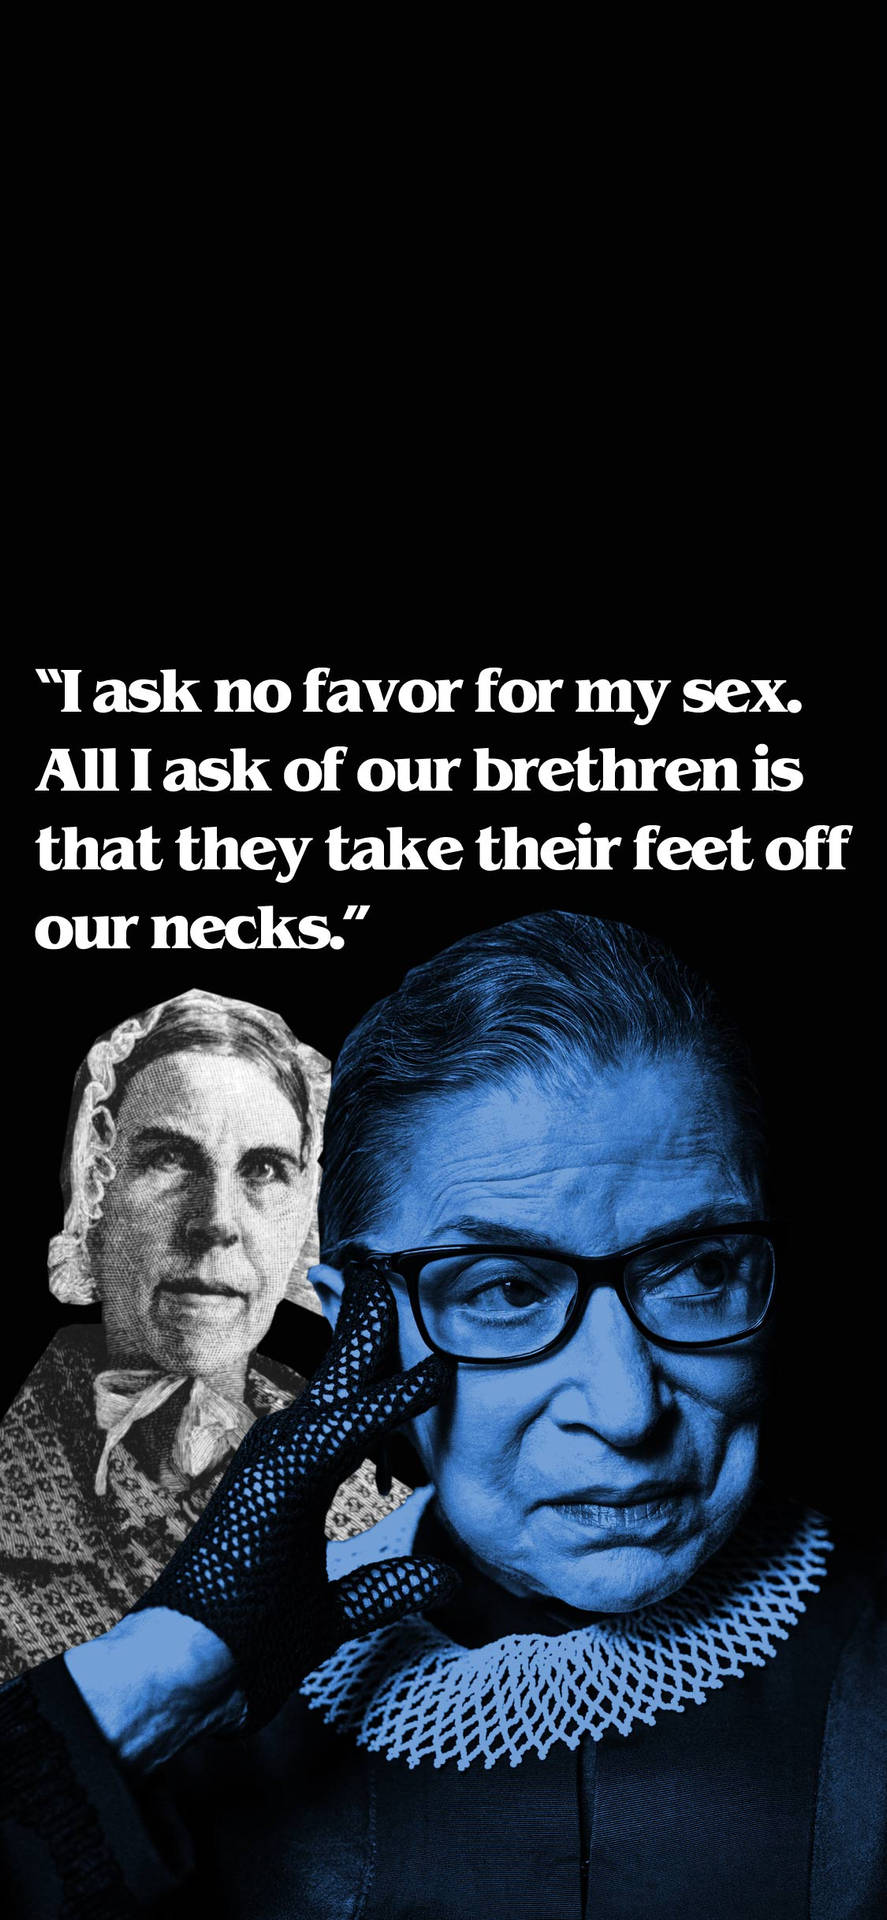 Ruth Bader Ginsburg Monochromatic Blue Poster Wallpaper